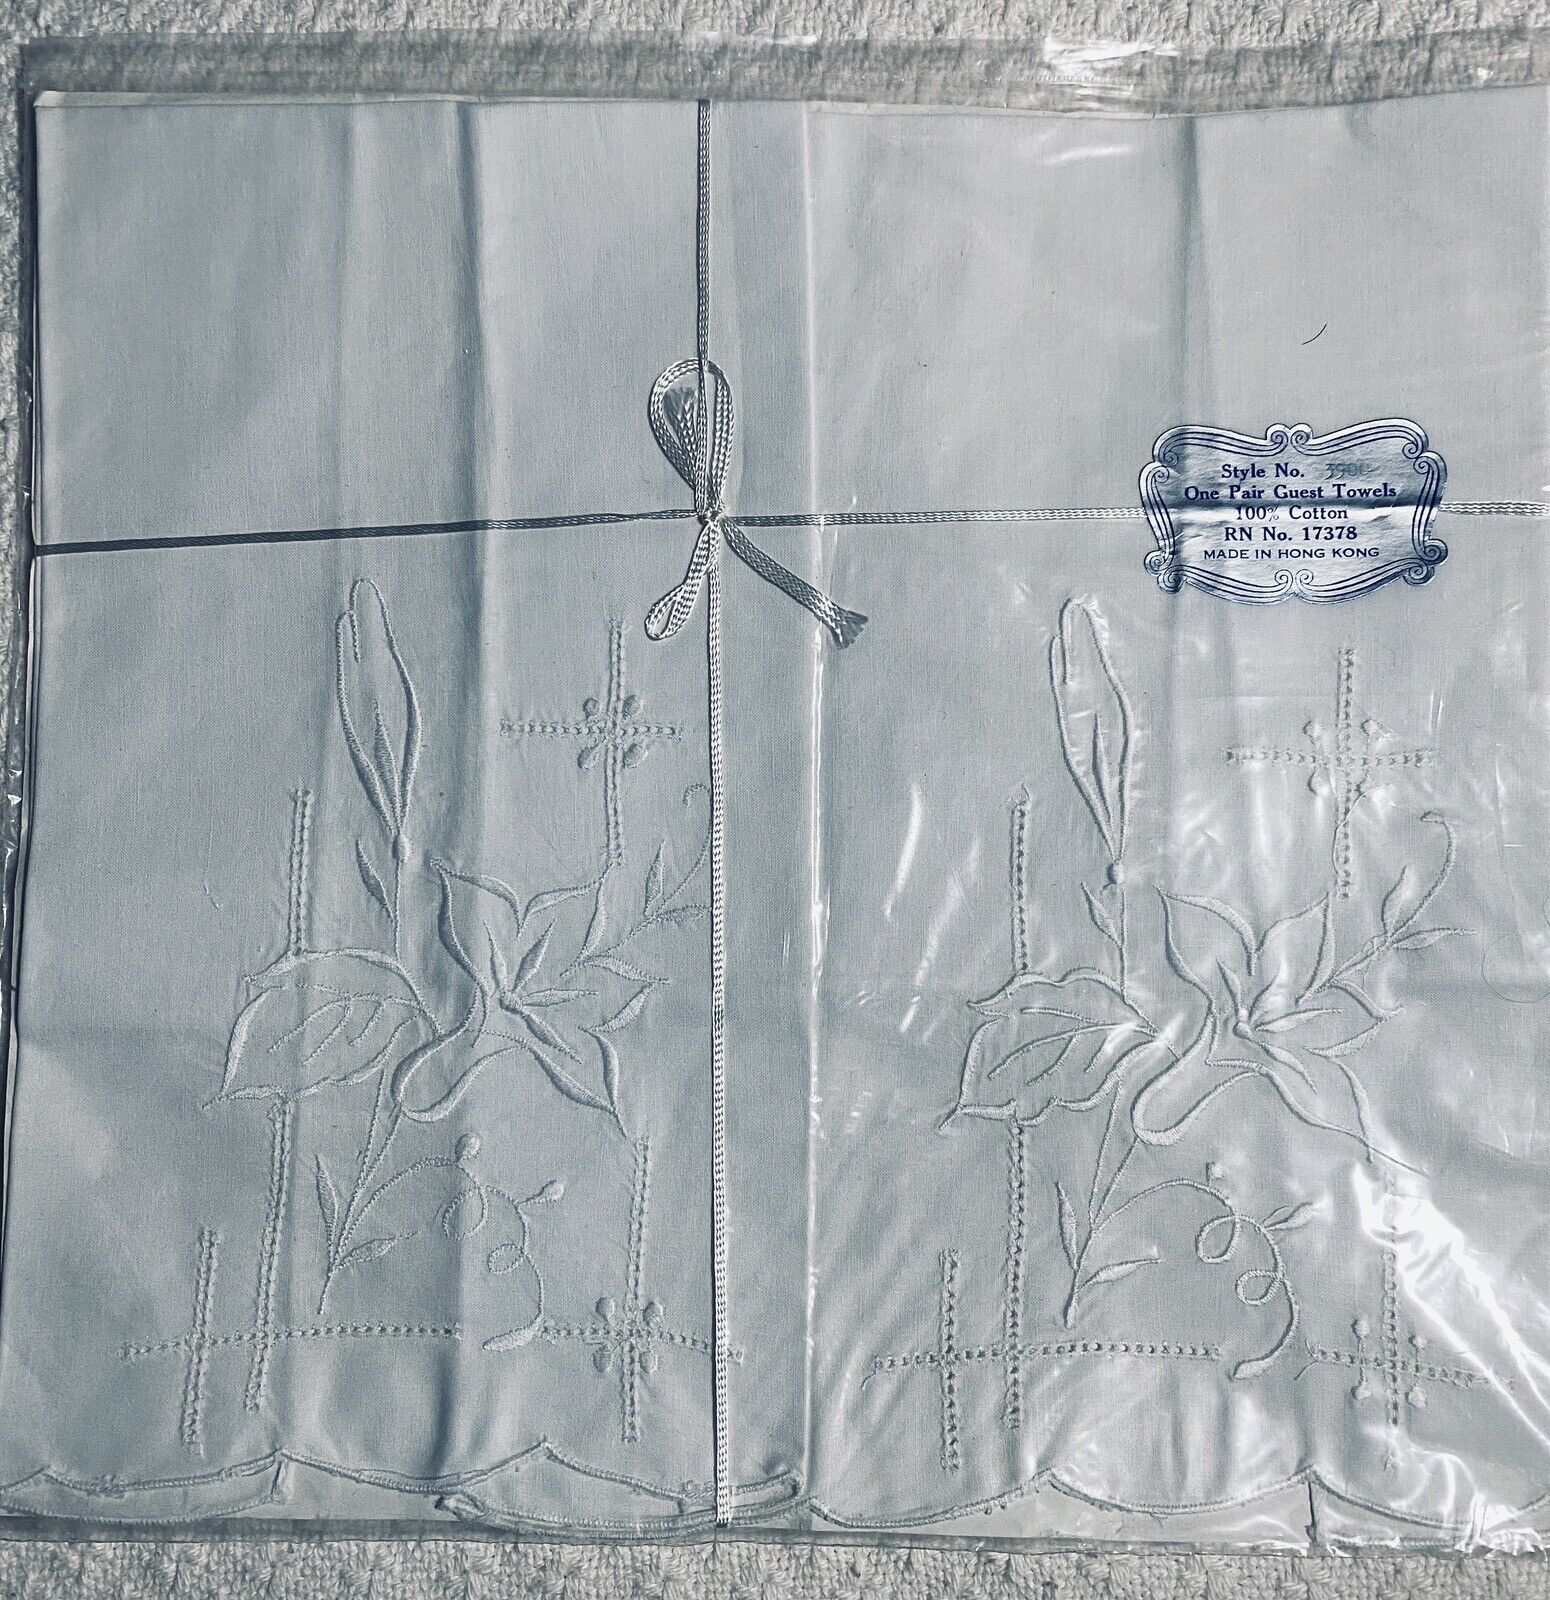 Pair of Vintage Cotton Embroidered Guest Towels still in Original Package